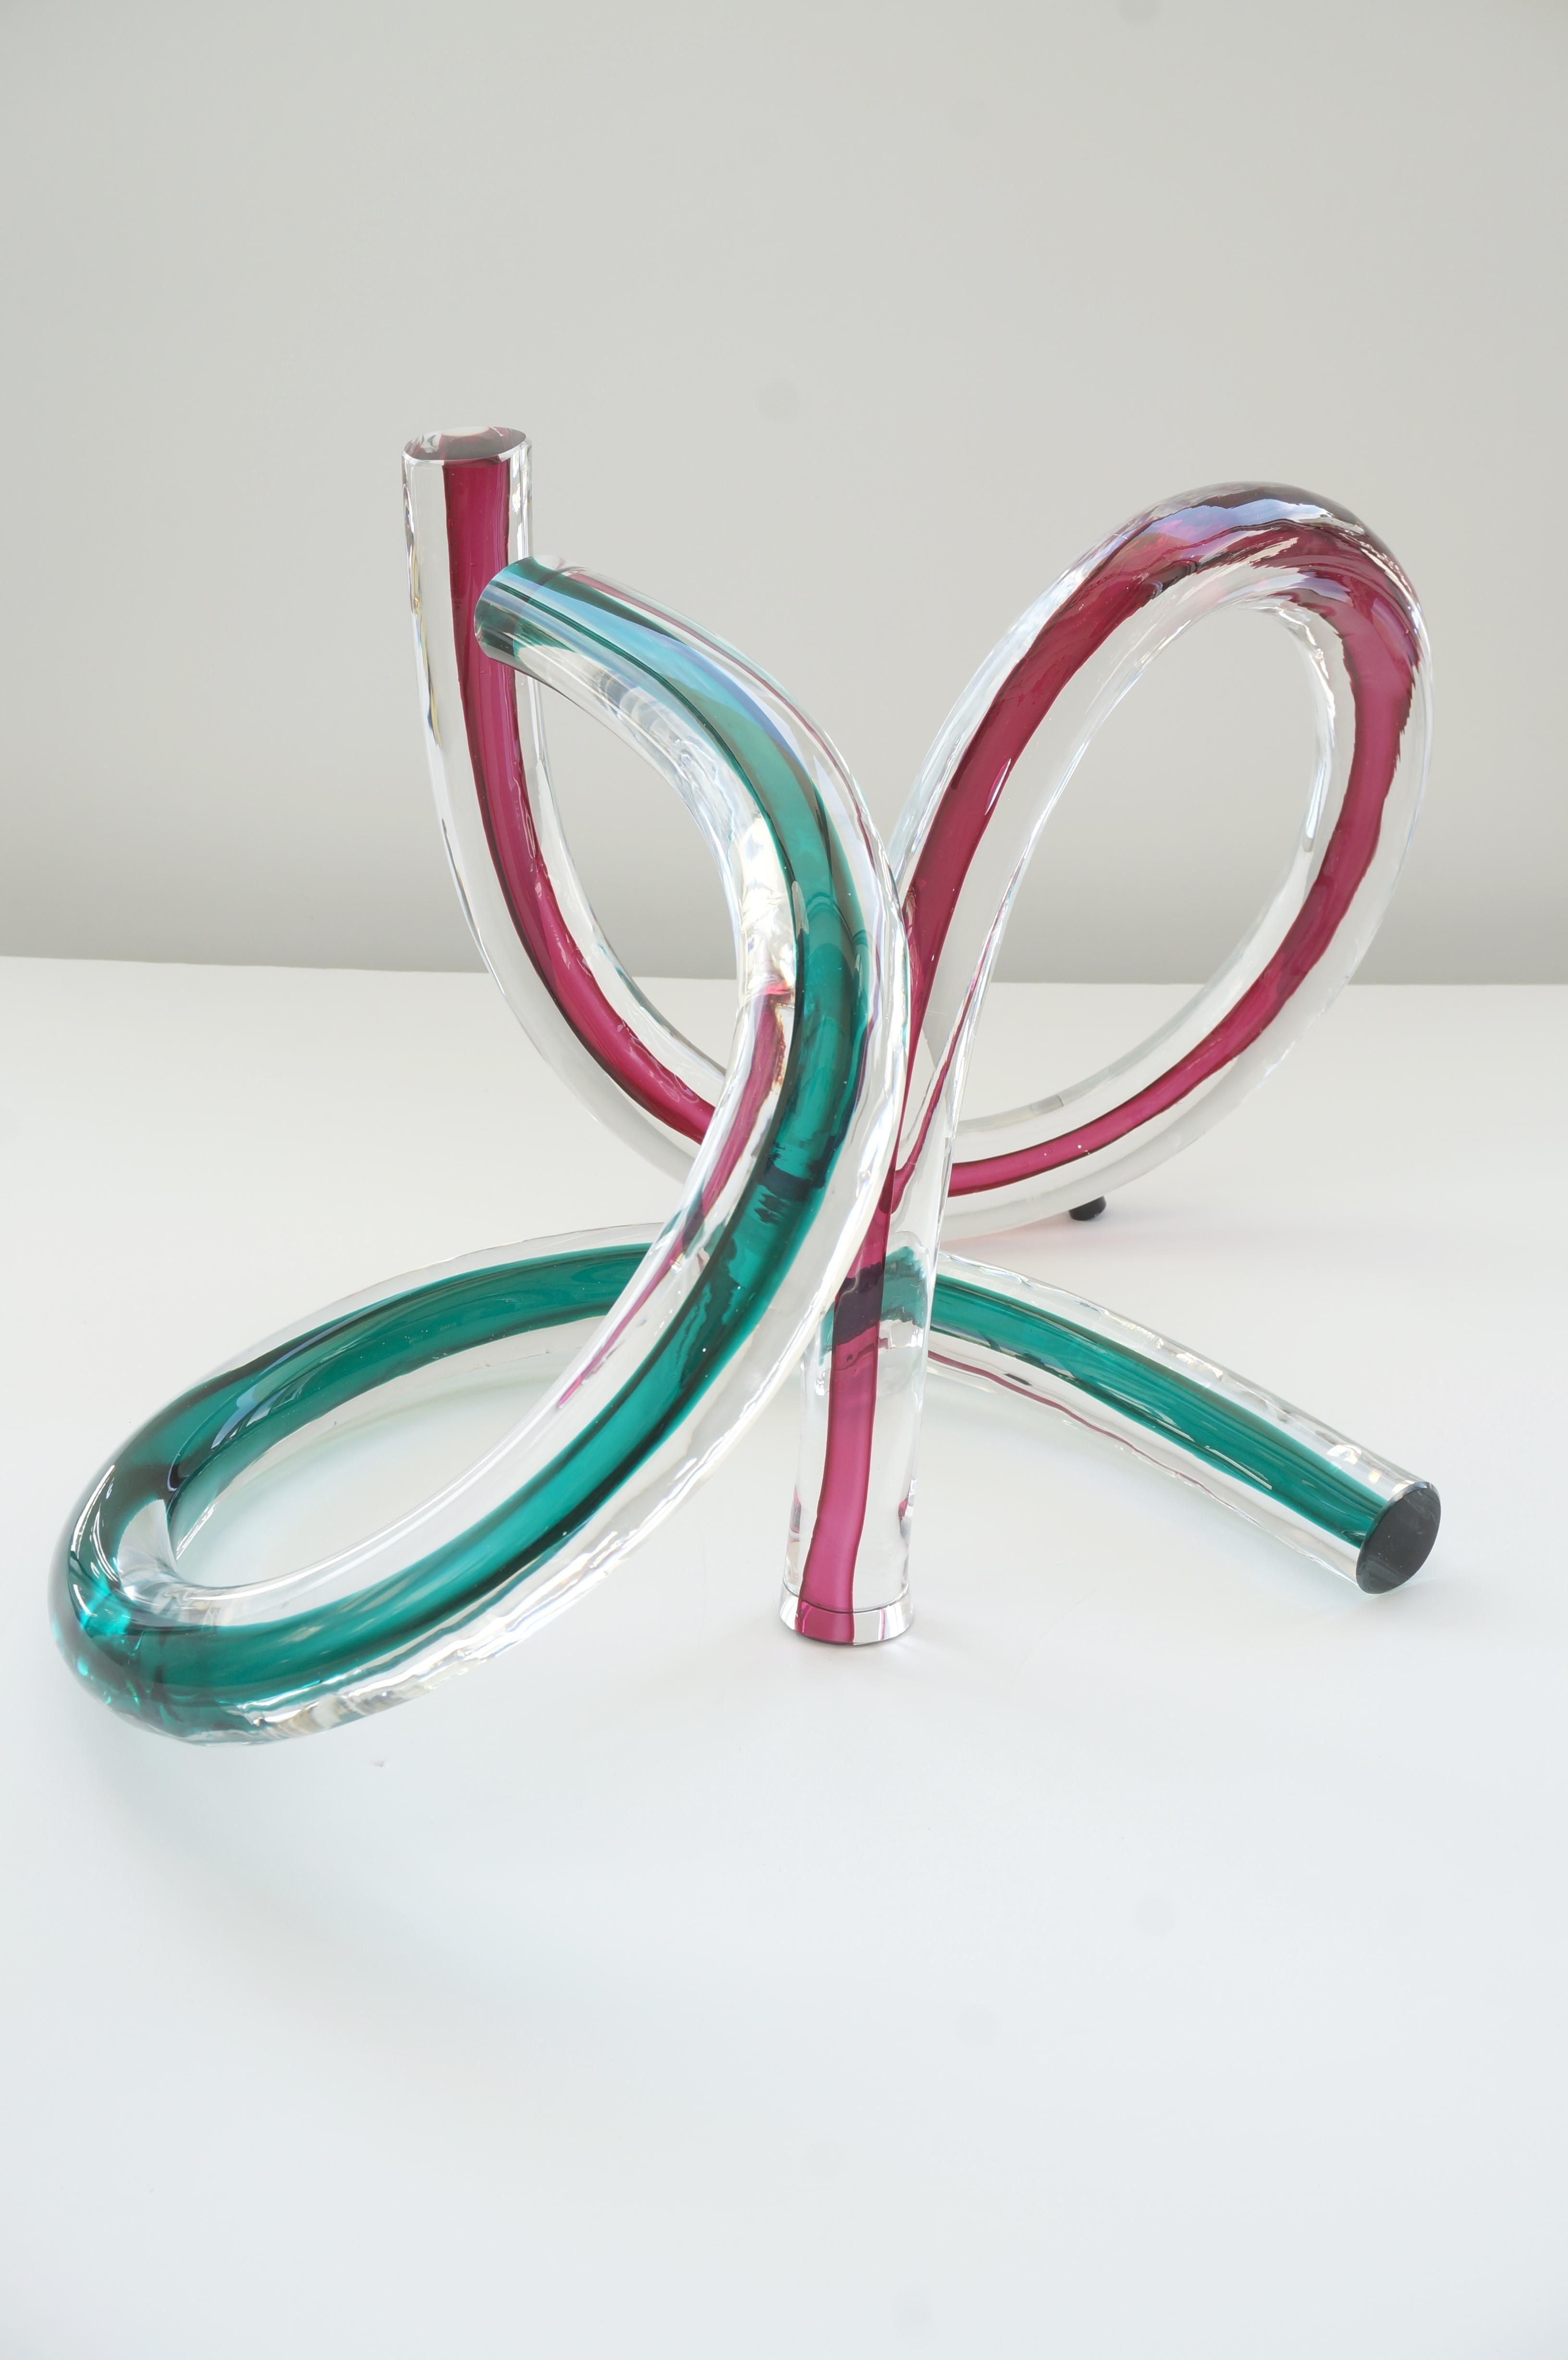 This two piece free-form artisan glass sculptures capture the light beautifully and the pieces can be used independently or in intertwined (see images).

Note: Dimensions of the red and clear are 12.50